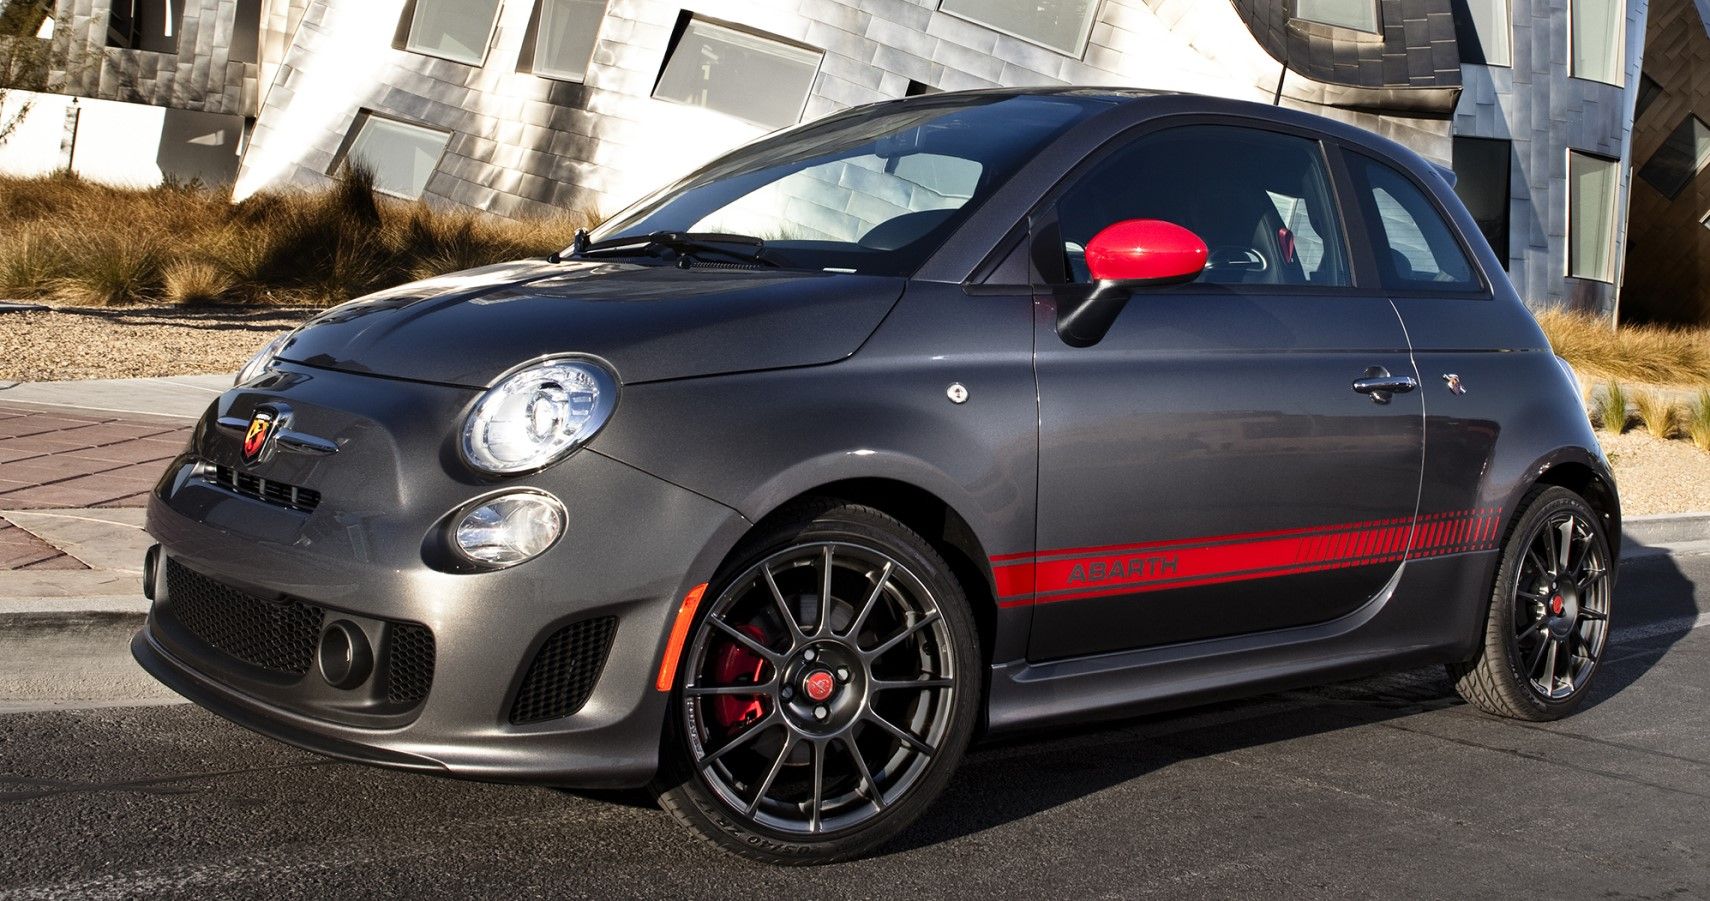 Fiat 500 Abarth looks sinister in the black-red exterior color